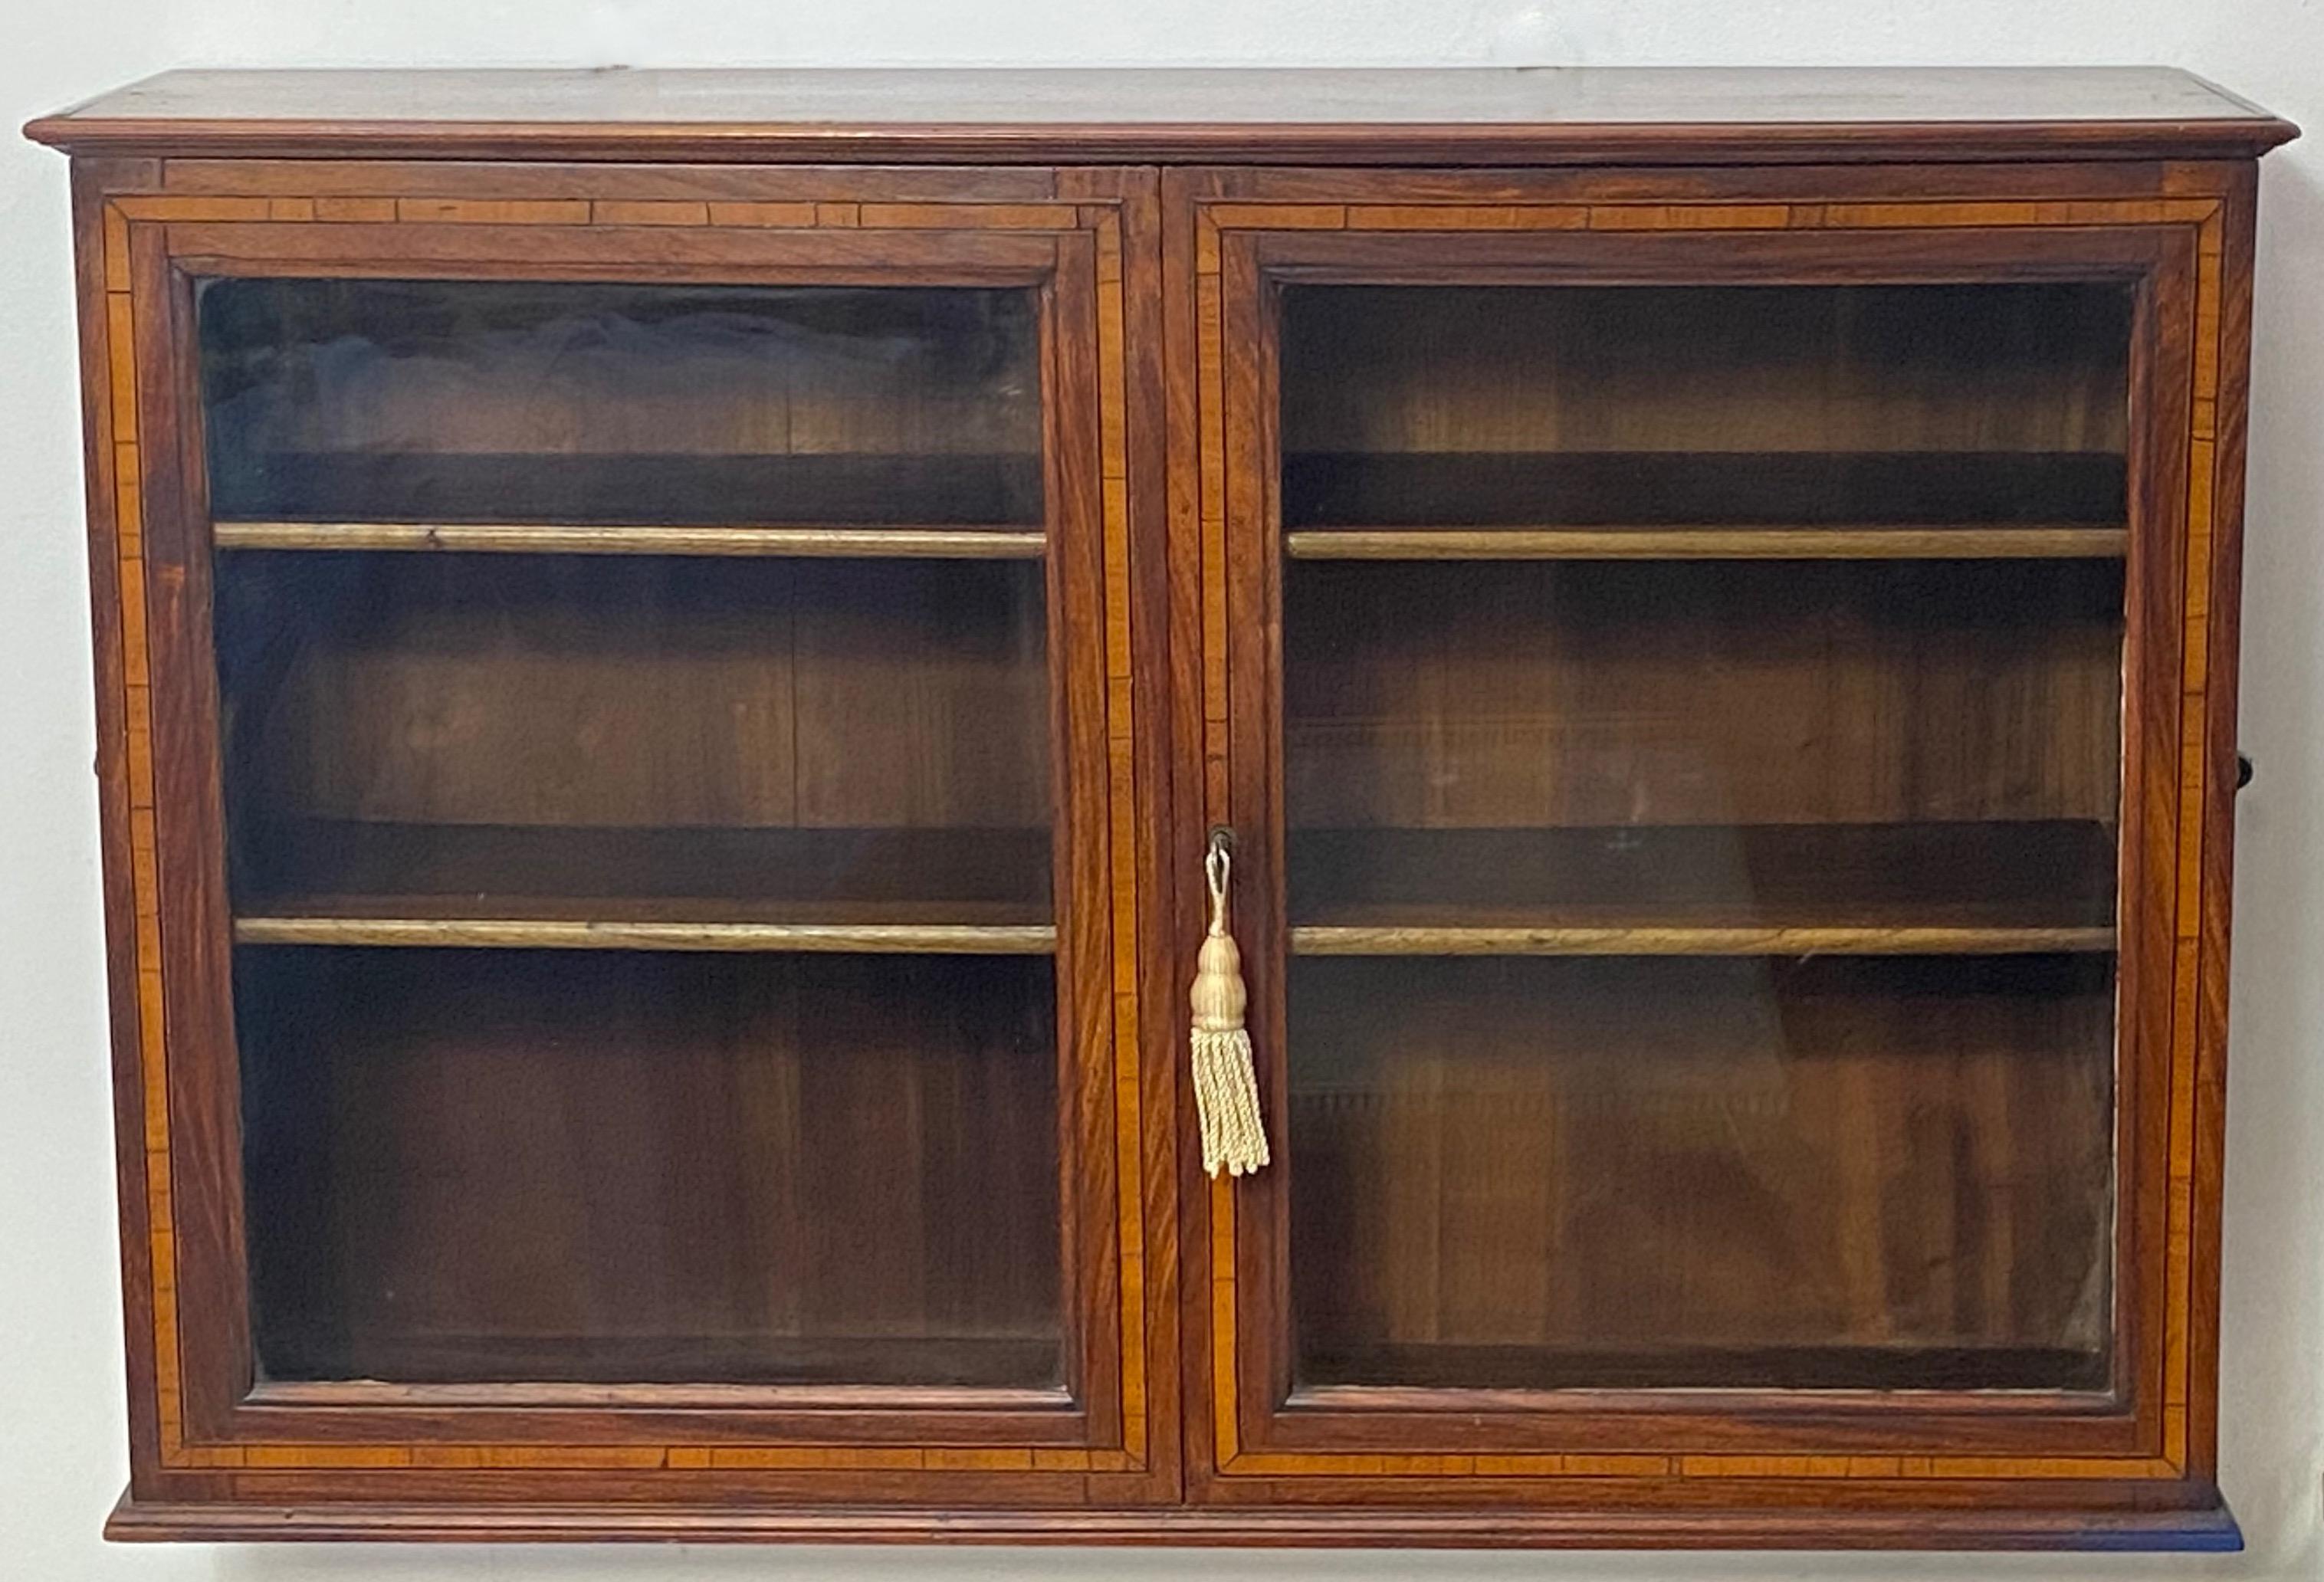 A mahogany with satinwood banding wall cabinet with original adjustable shelves, and original key and hardware.
In excellent antique condition.
England, Georgian / Regency circa 1820.

 